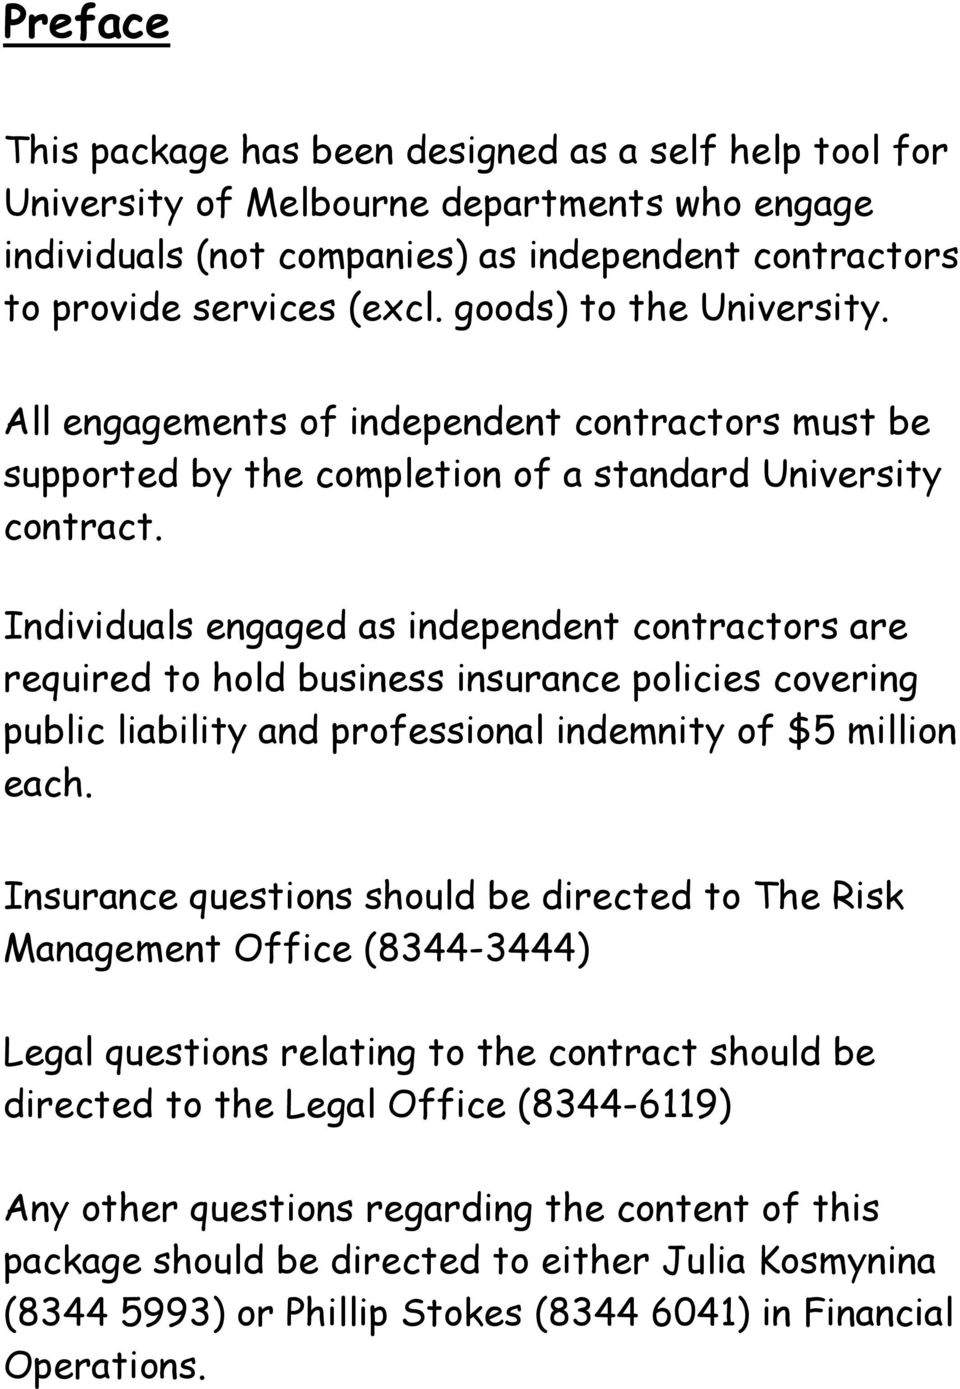 Individuals engaged as independent contractors are required to hold business insurance policies covering public liability and professional indemnity of $5 million each.